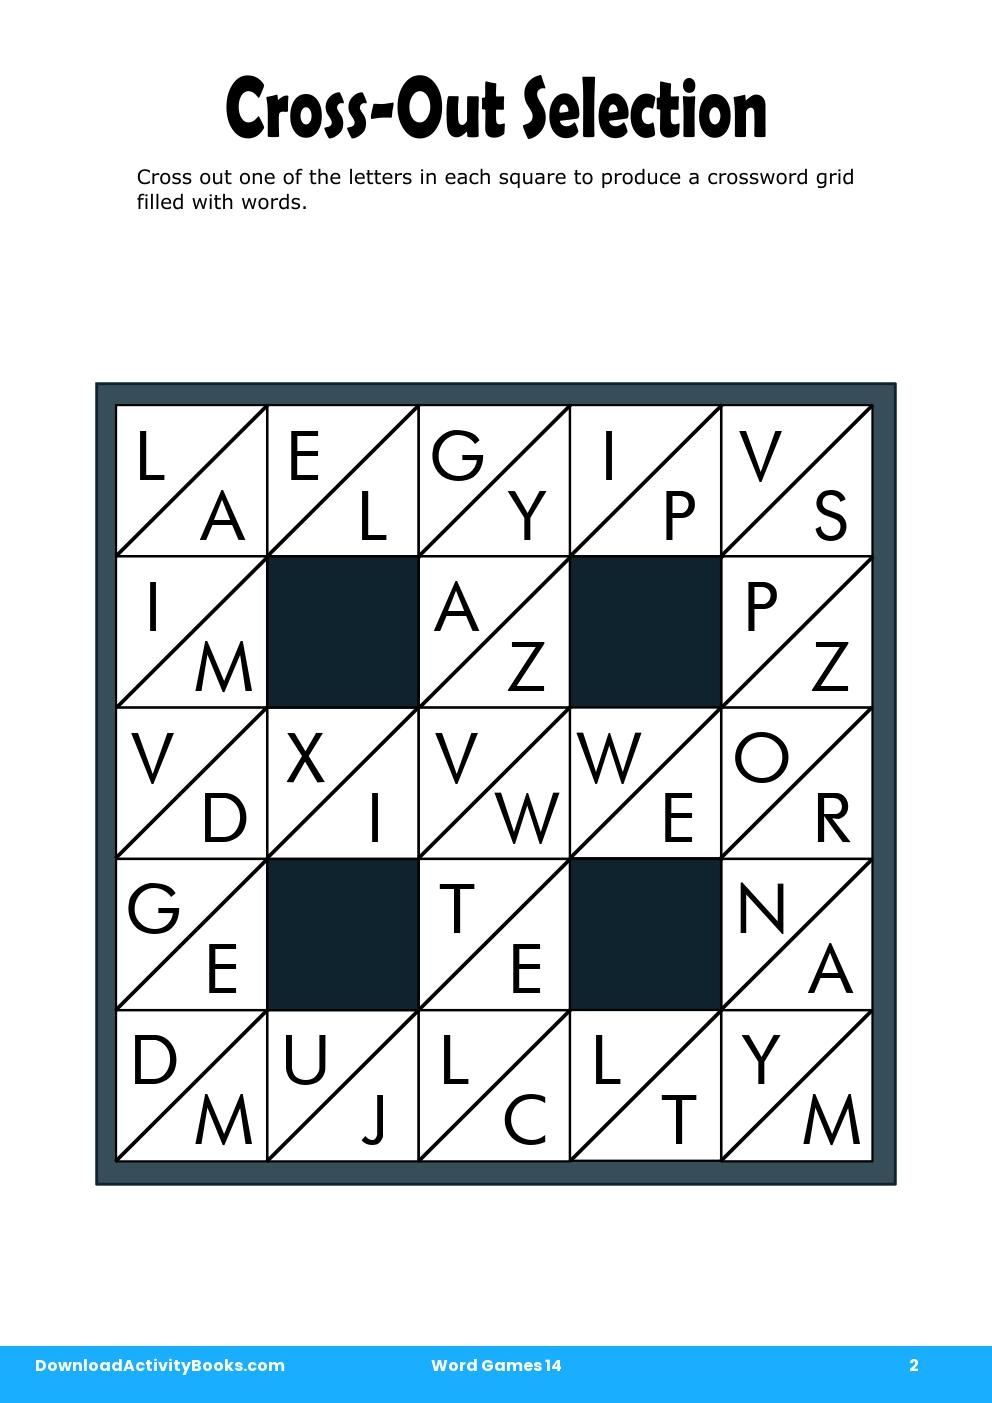 Cross-Out Selection in Word Games 14